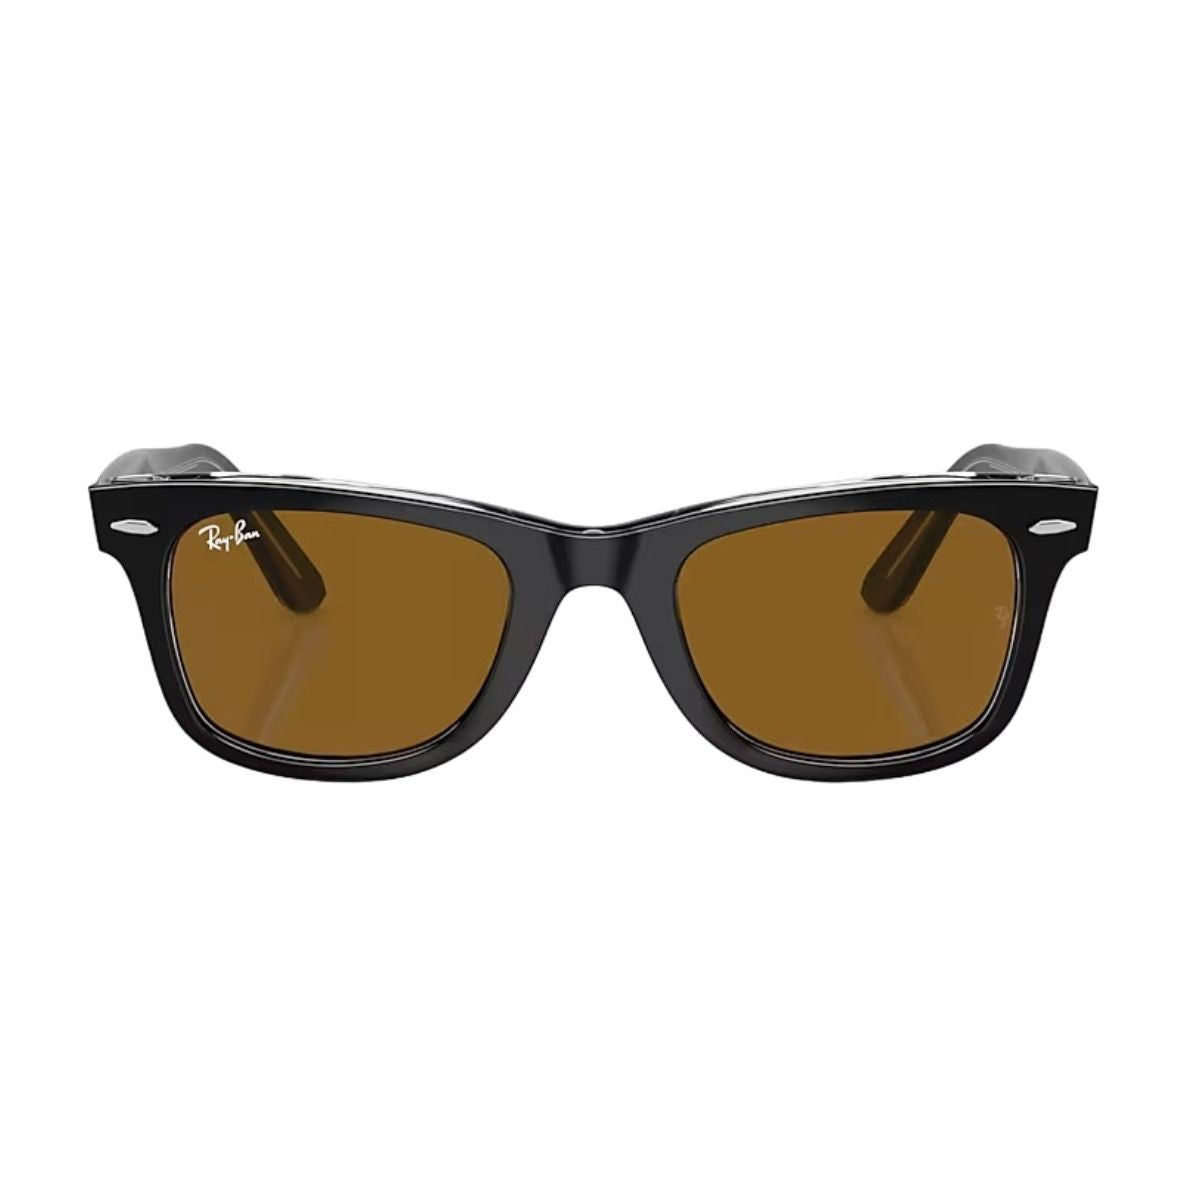 "Buy Rayban 2140 1294/33 Polarized Sunglasses For Men And Women At Optorium"